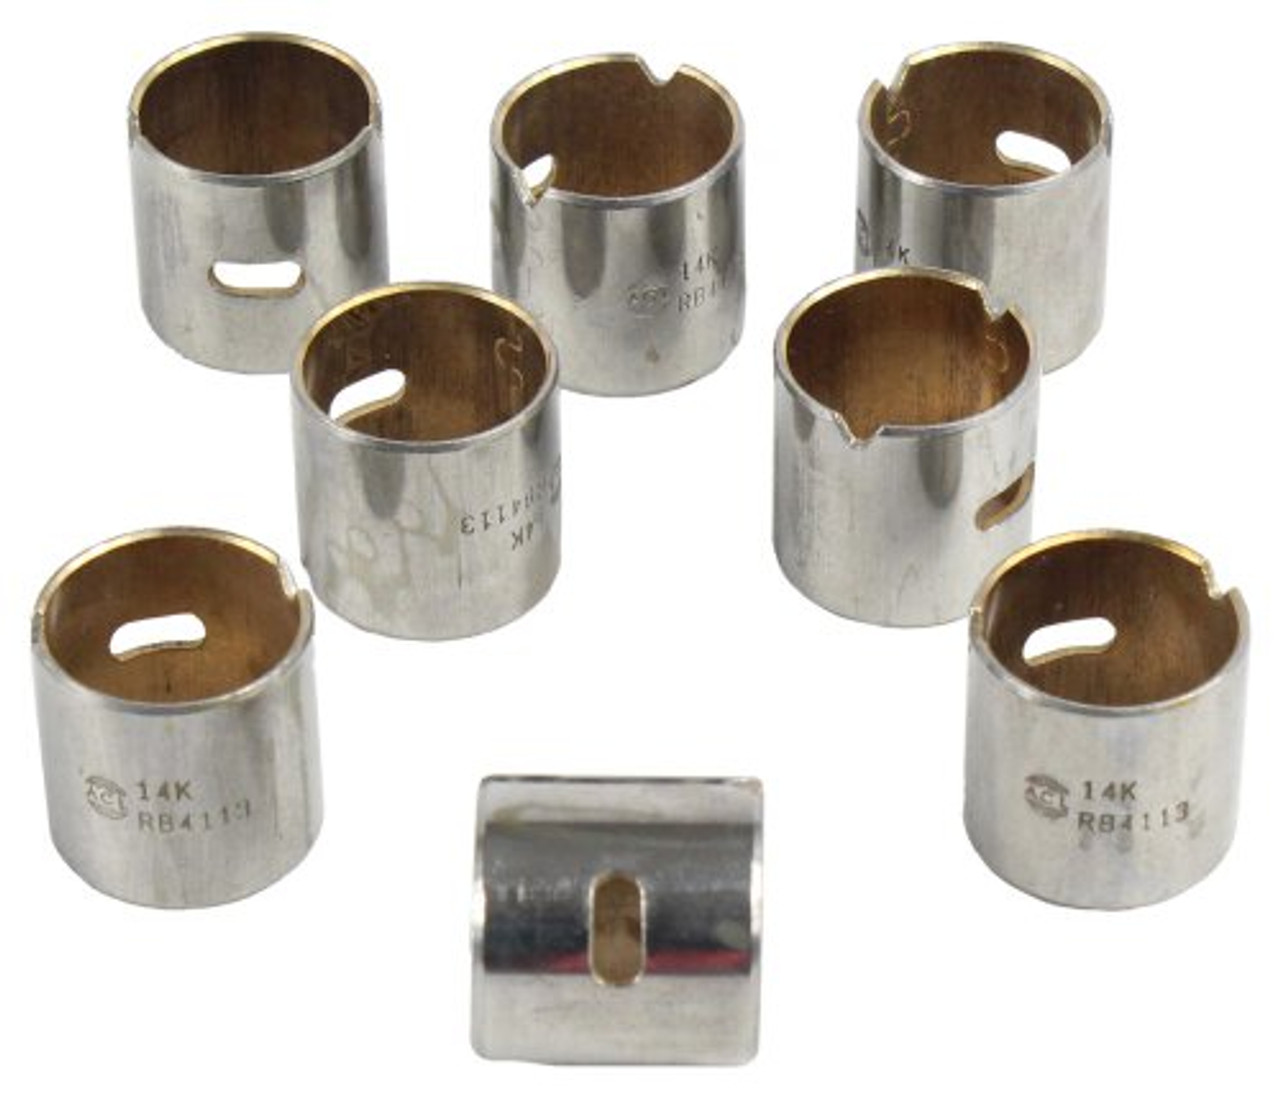 Piston Pin Bushings - 2013 Ford Expedition 5.4L Engine Parts # PB4131ZE141